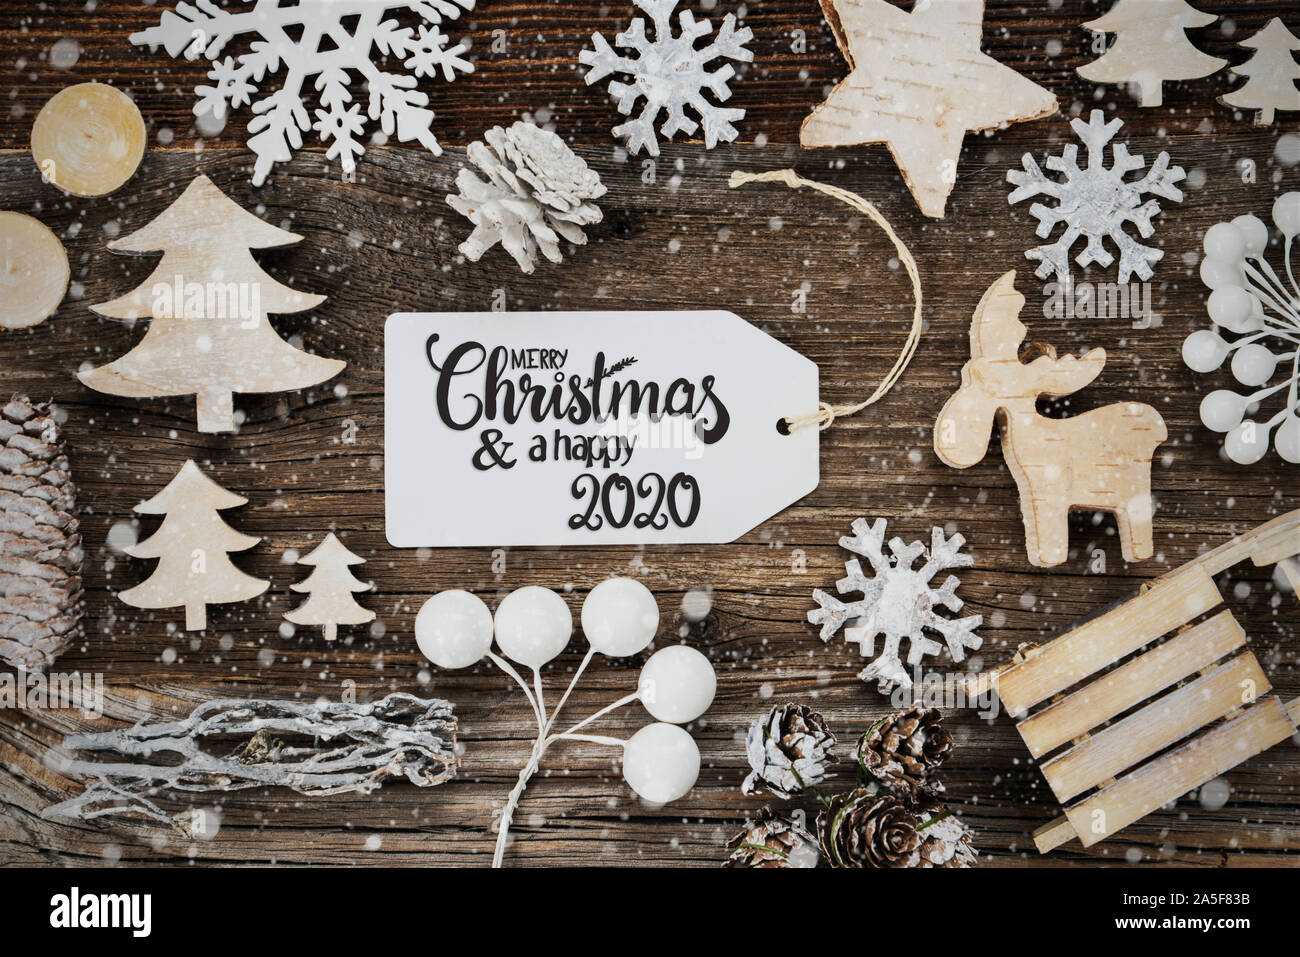 Label, Frame Of Christmas Decoration, Happy 2020, Snowflakes Stock Photo